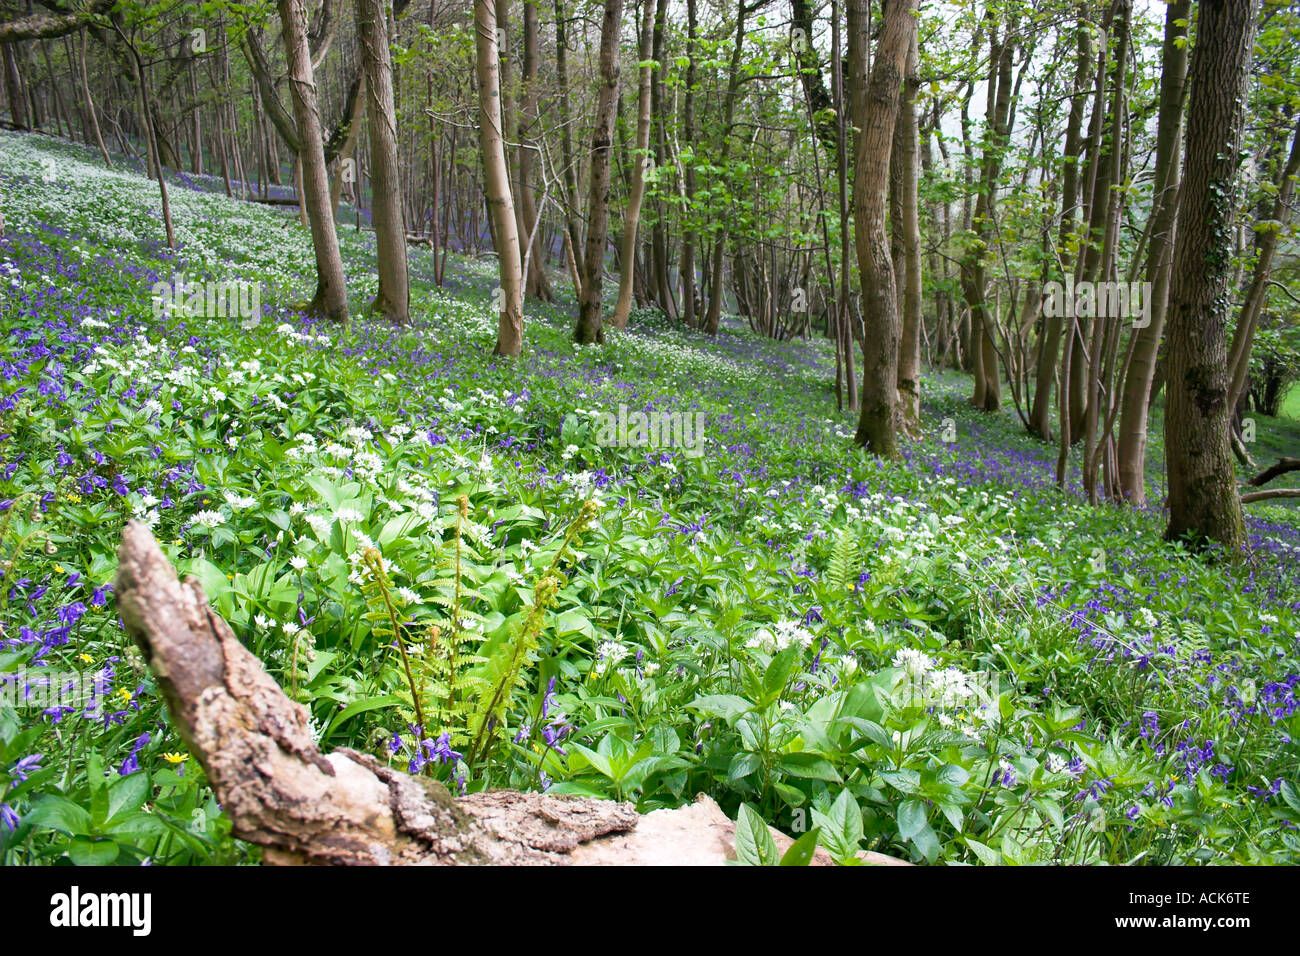 Wooded Forest of allium White Wild Garlic and Bluebells and trees Tyneham Village Stock Photo